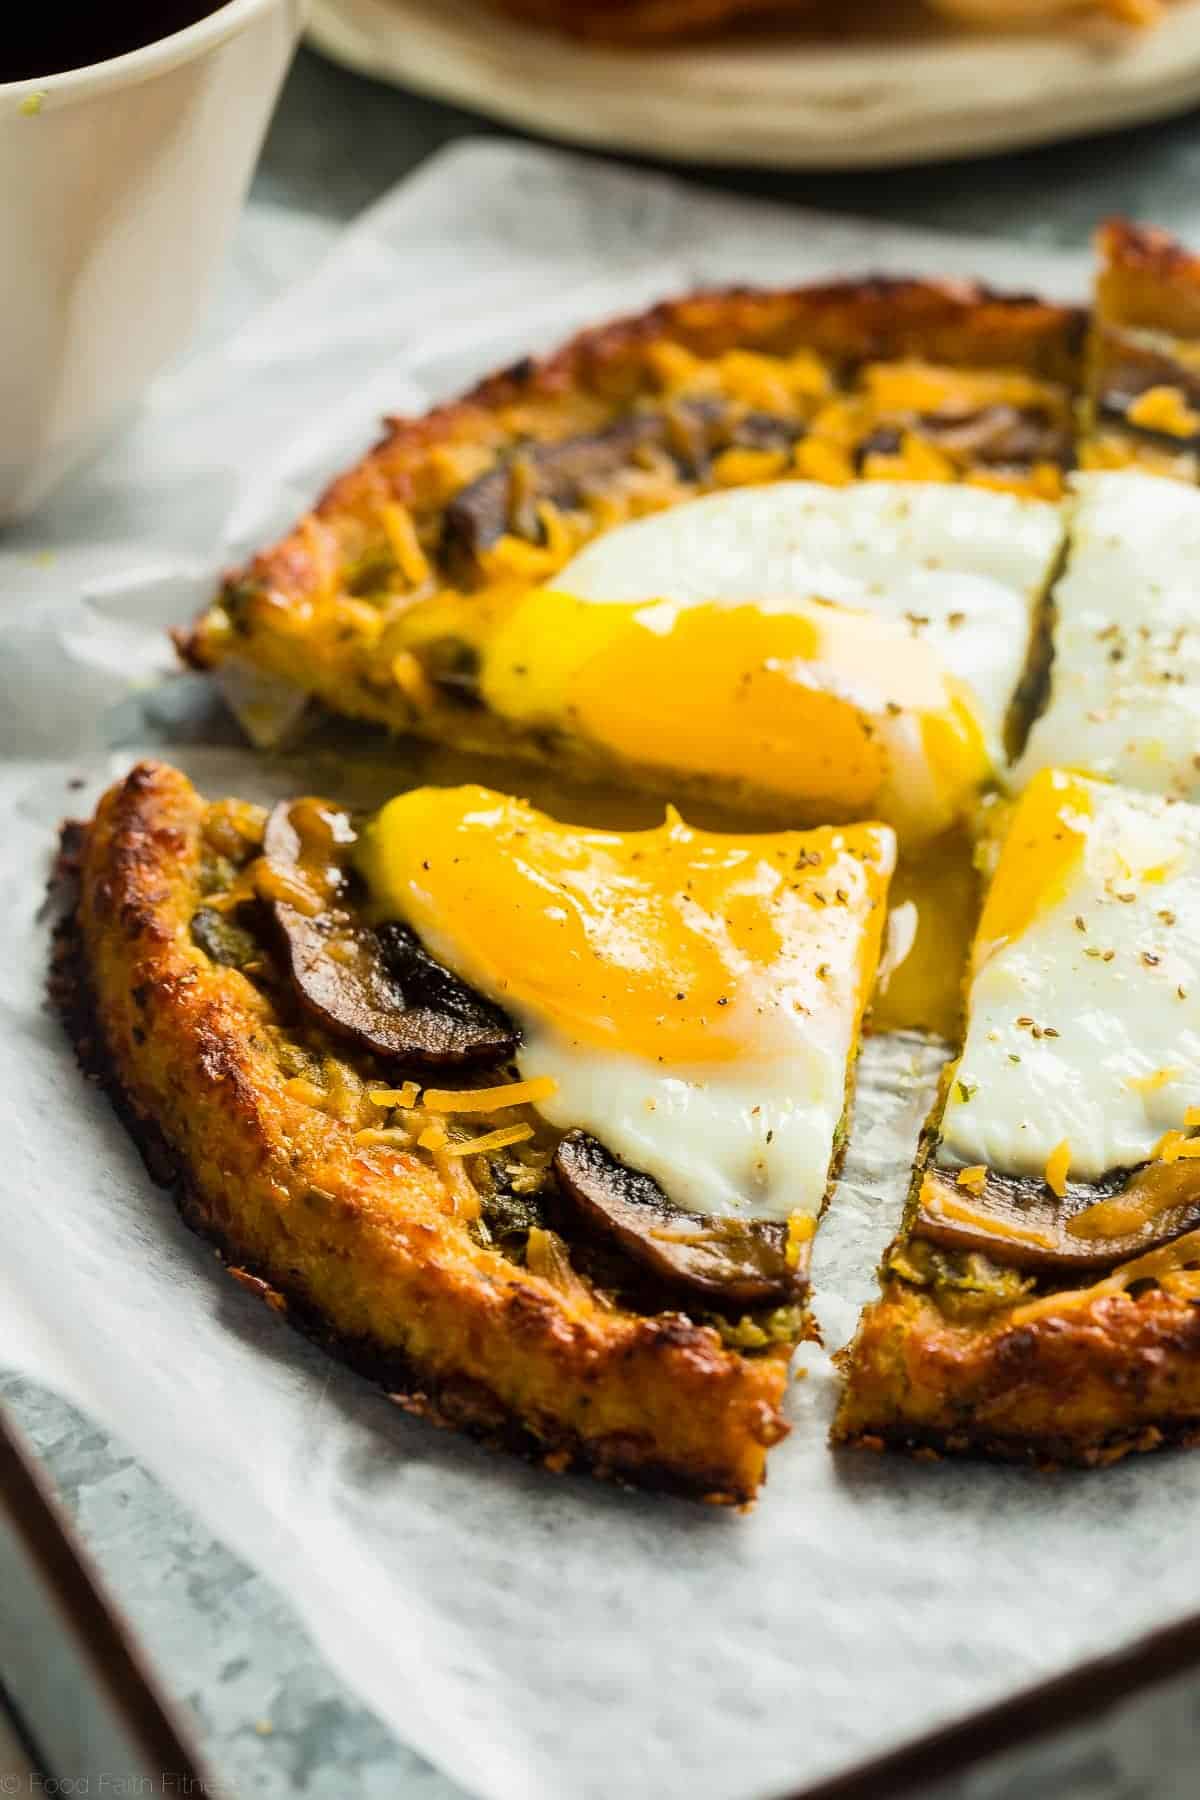 Bacon Pesto and Egg Cauliflower Breakfast Pizza - This healthy cauliflower pizza has soft eggs and a leek-bacon pesto. You'll never know it's secretly high in protein, gluten free and low carb! Perfect for breakfast or brinner! | Foodfaithfitness.com | @FoodFaithFit